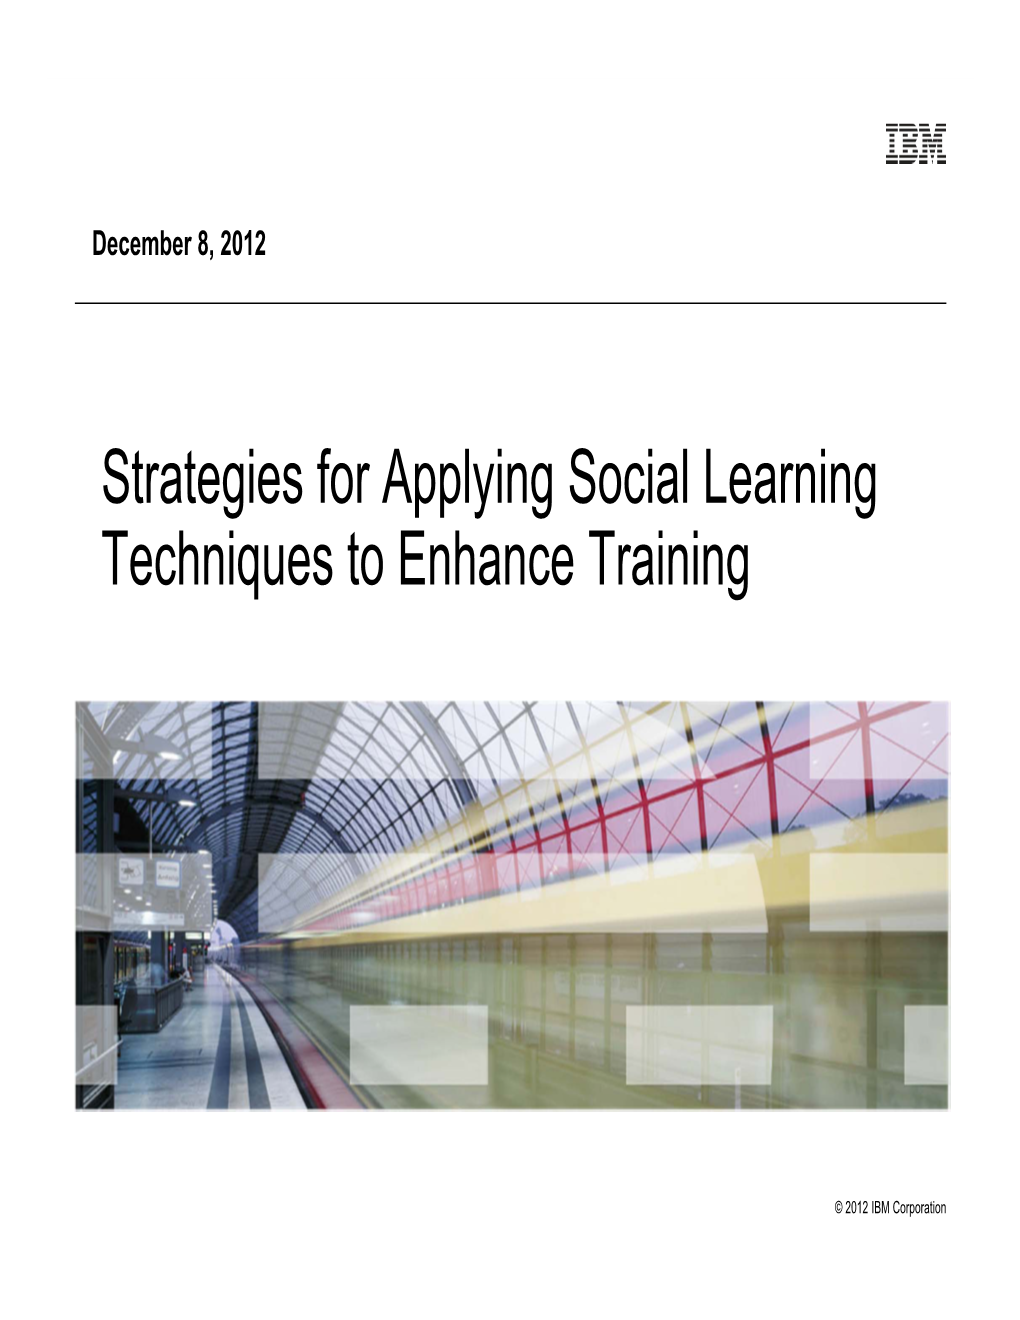 Strategies for Applying Social Learning Techniques to Enhance Training